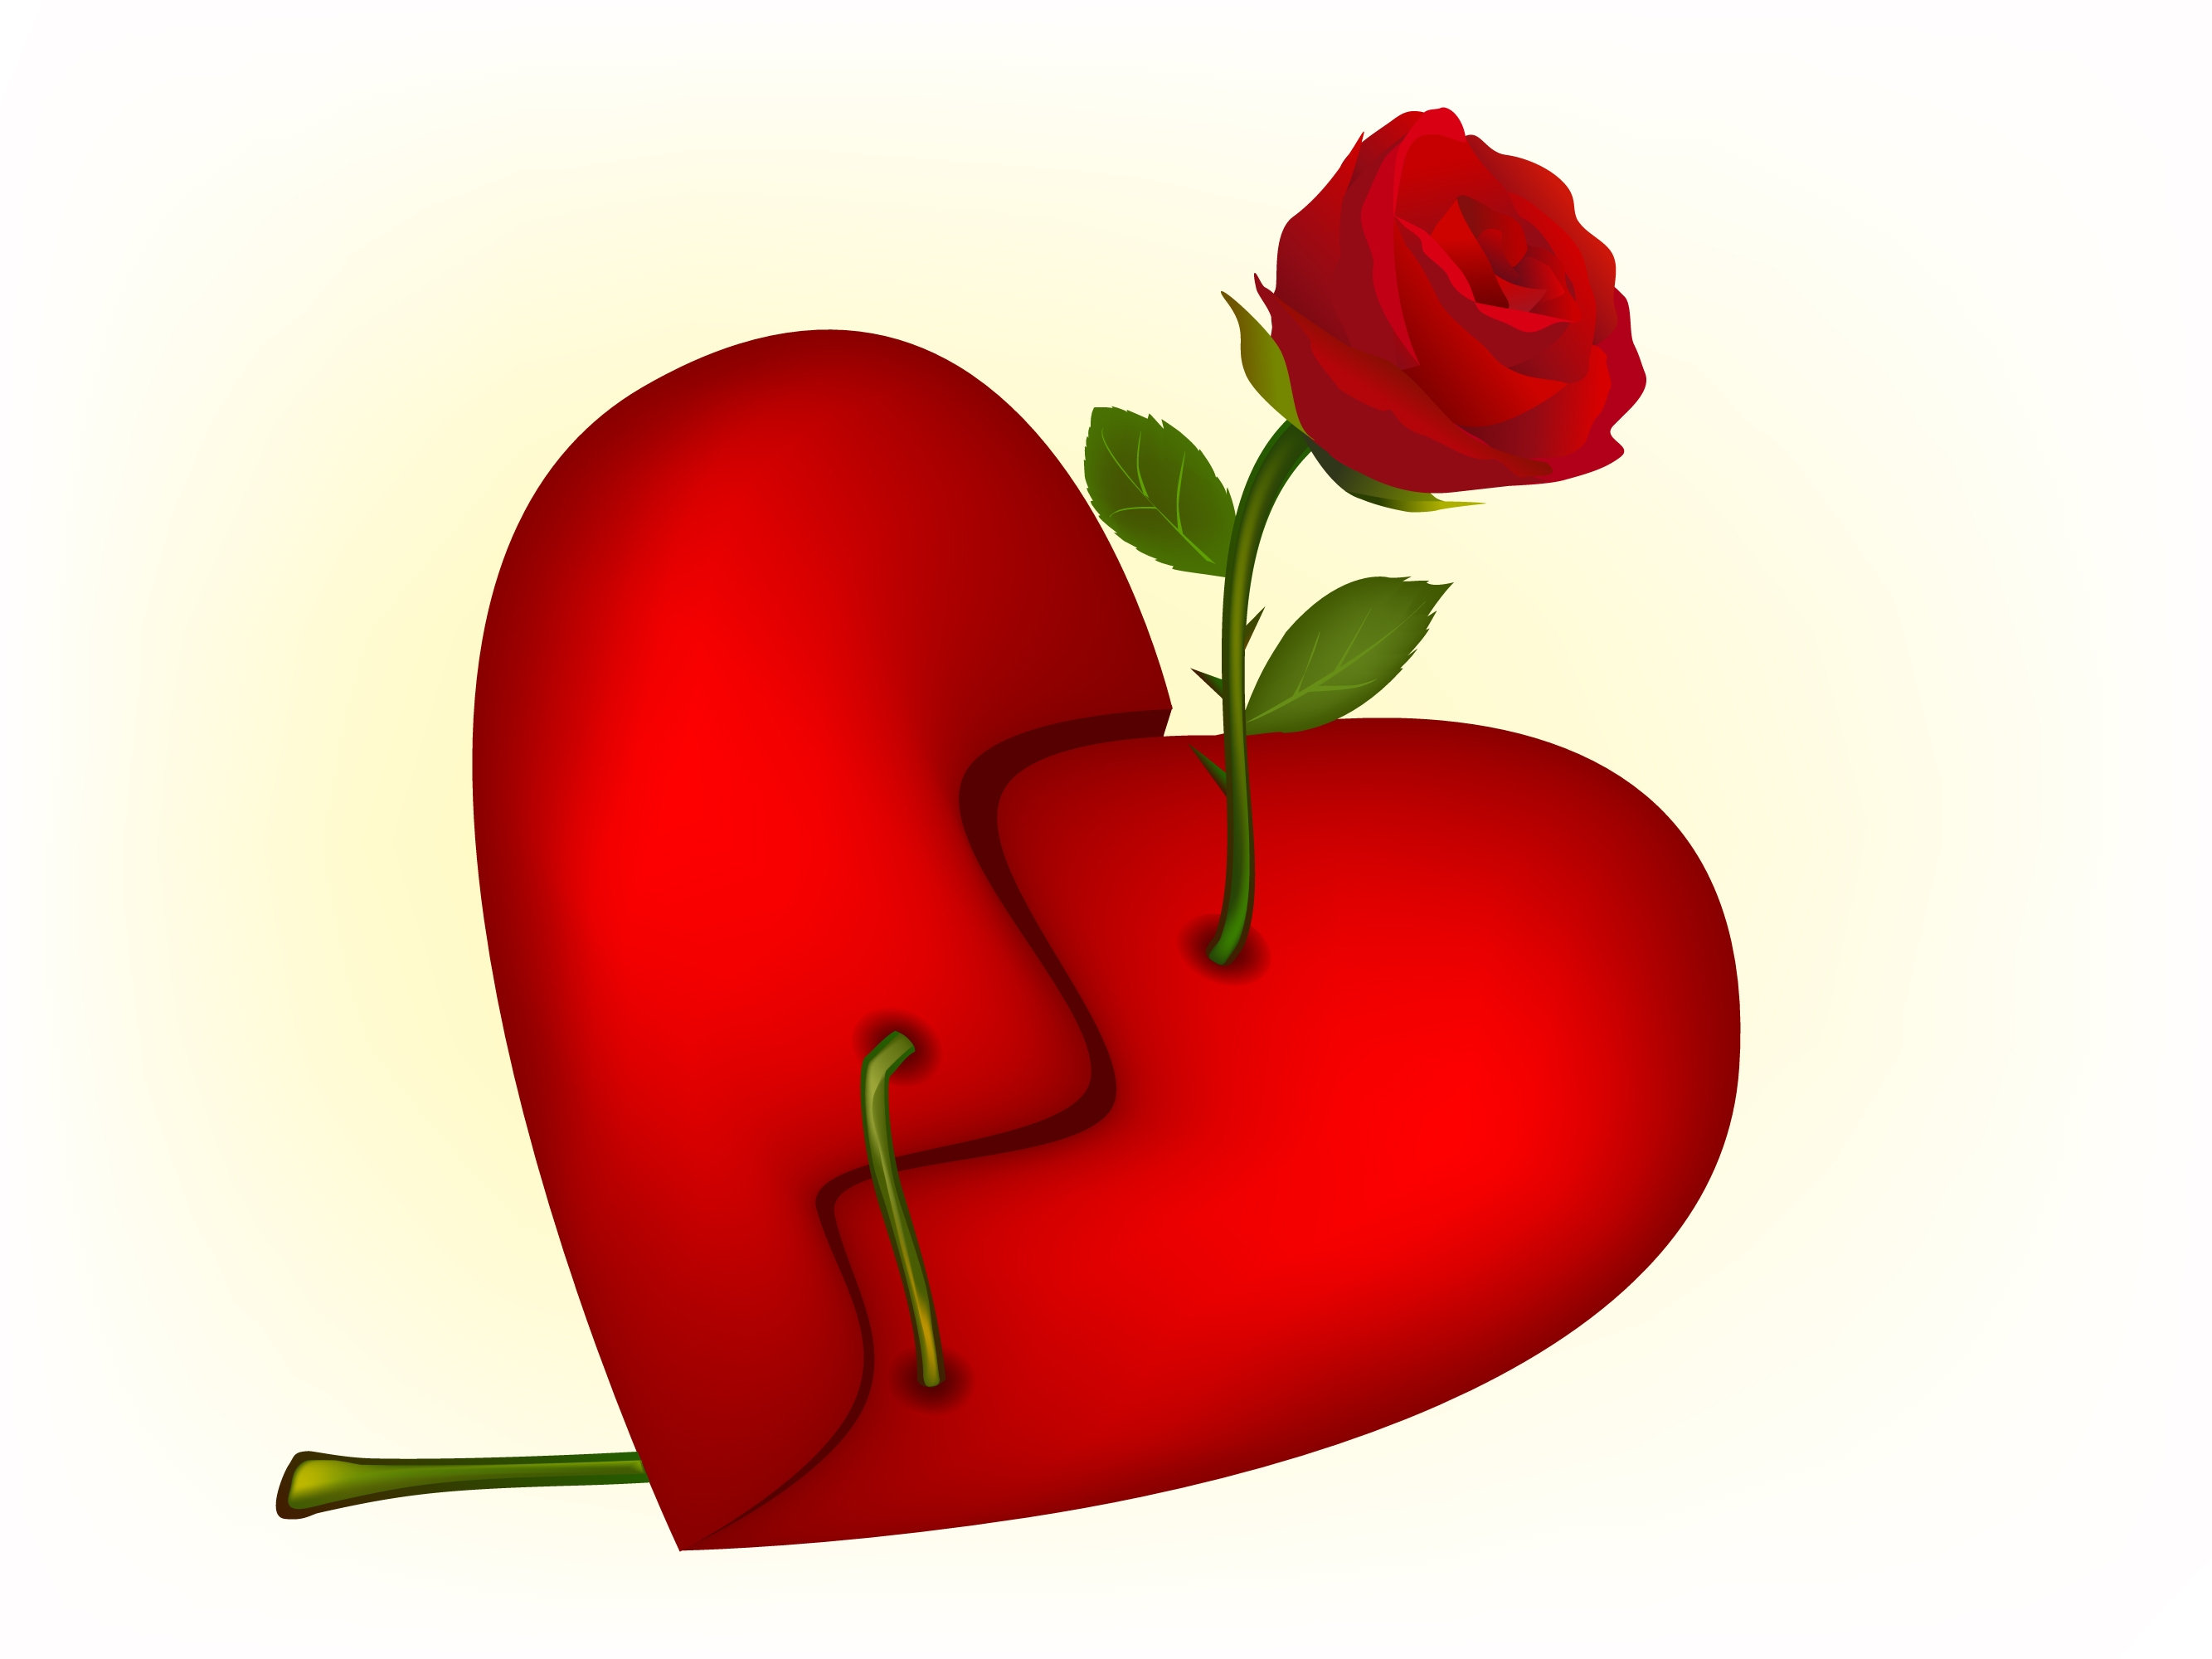 A Heart With Rose - ClipArt Best